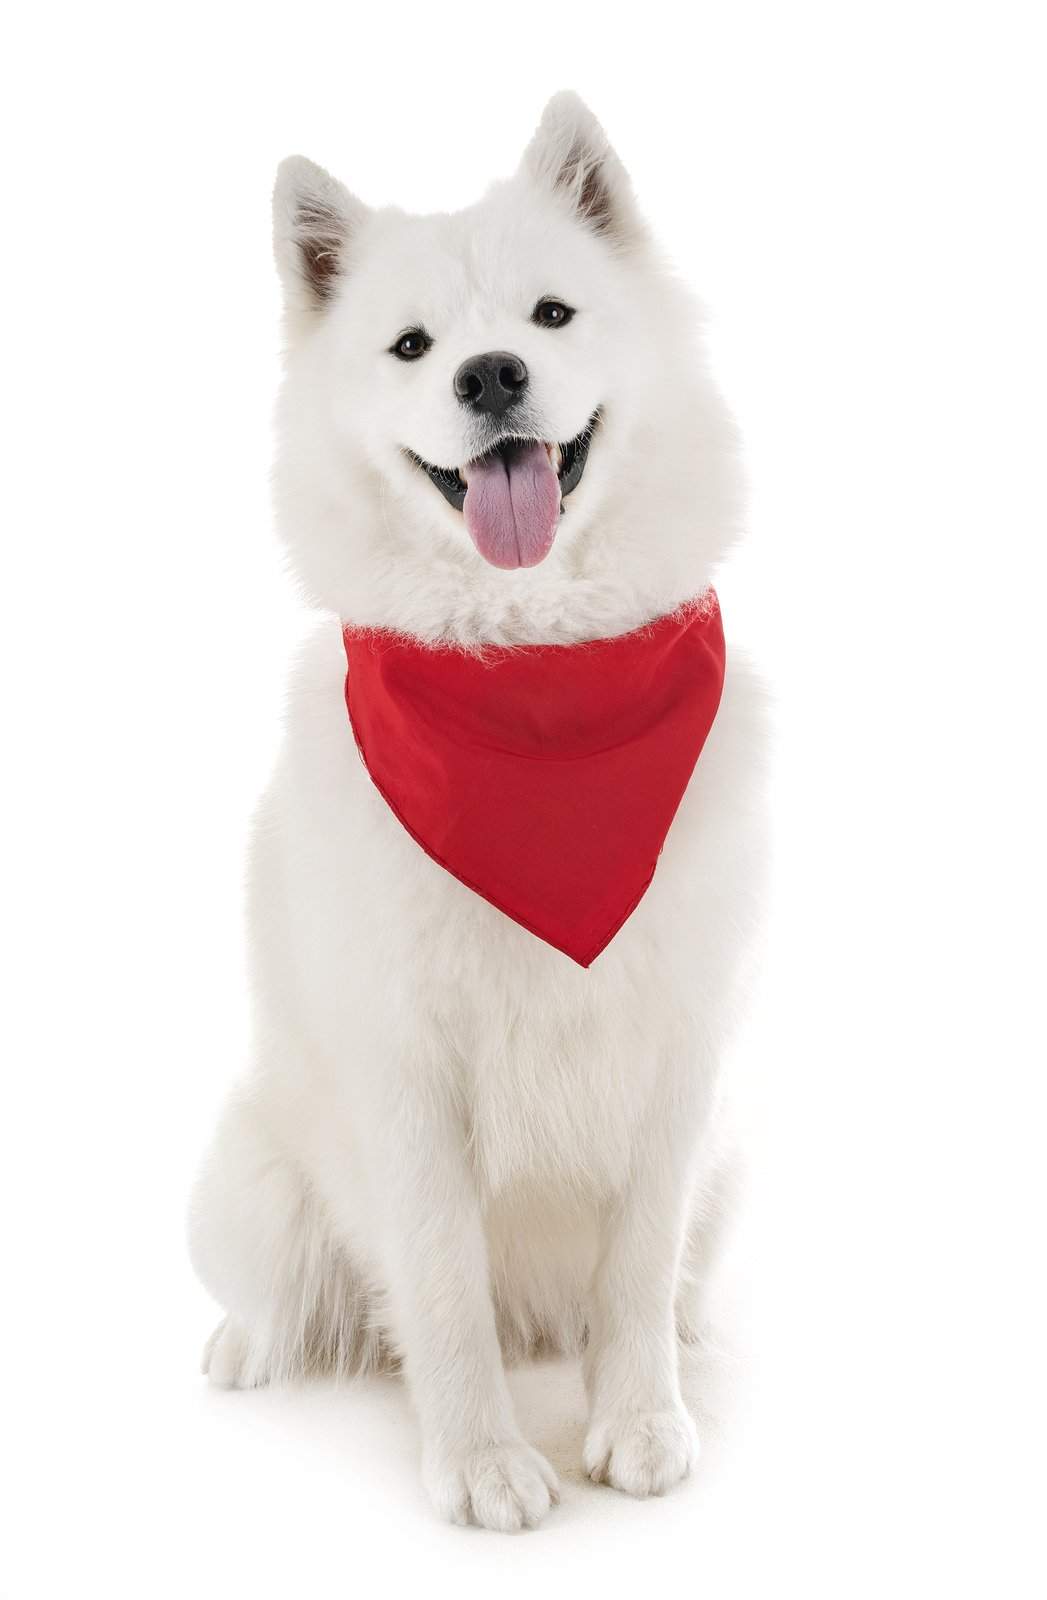 Dog Bandanas - 6 Pack - Scarf Triangle Bibs for Small, Medium and Large Puppies, Dogs and Cats